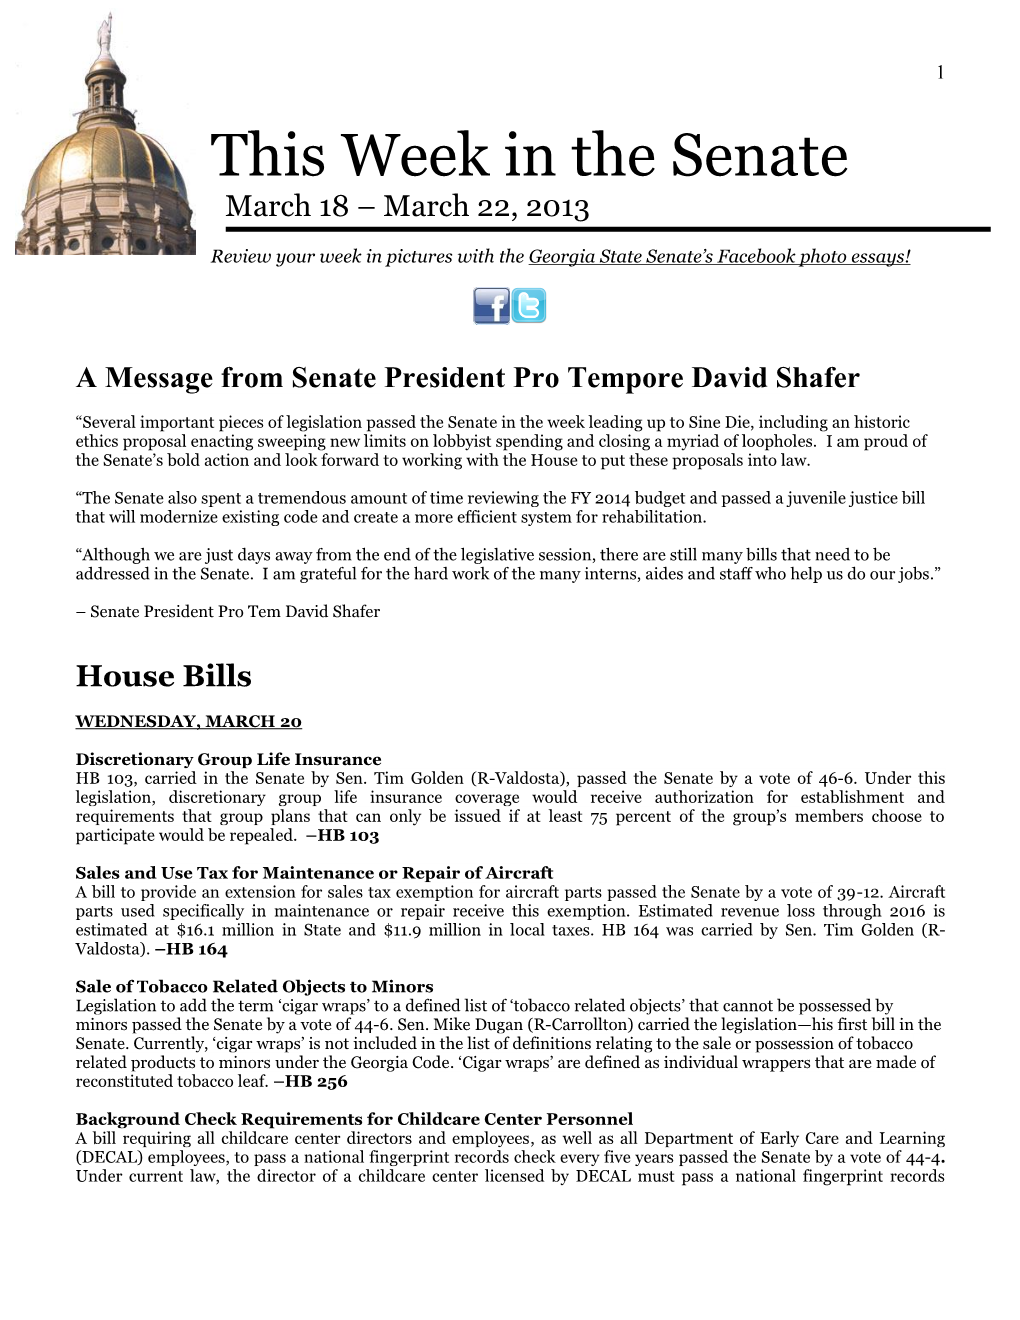 This Week in the Senate March 18 – March 22, 2013